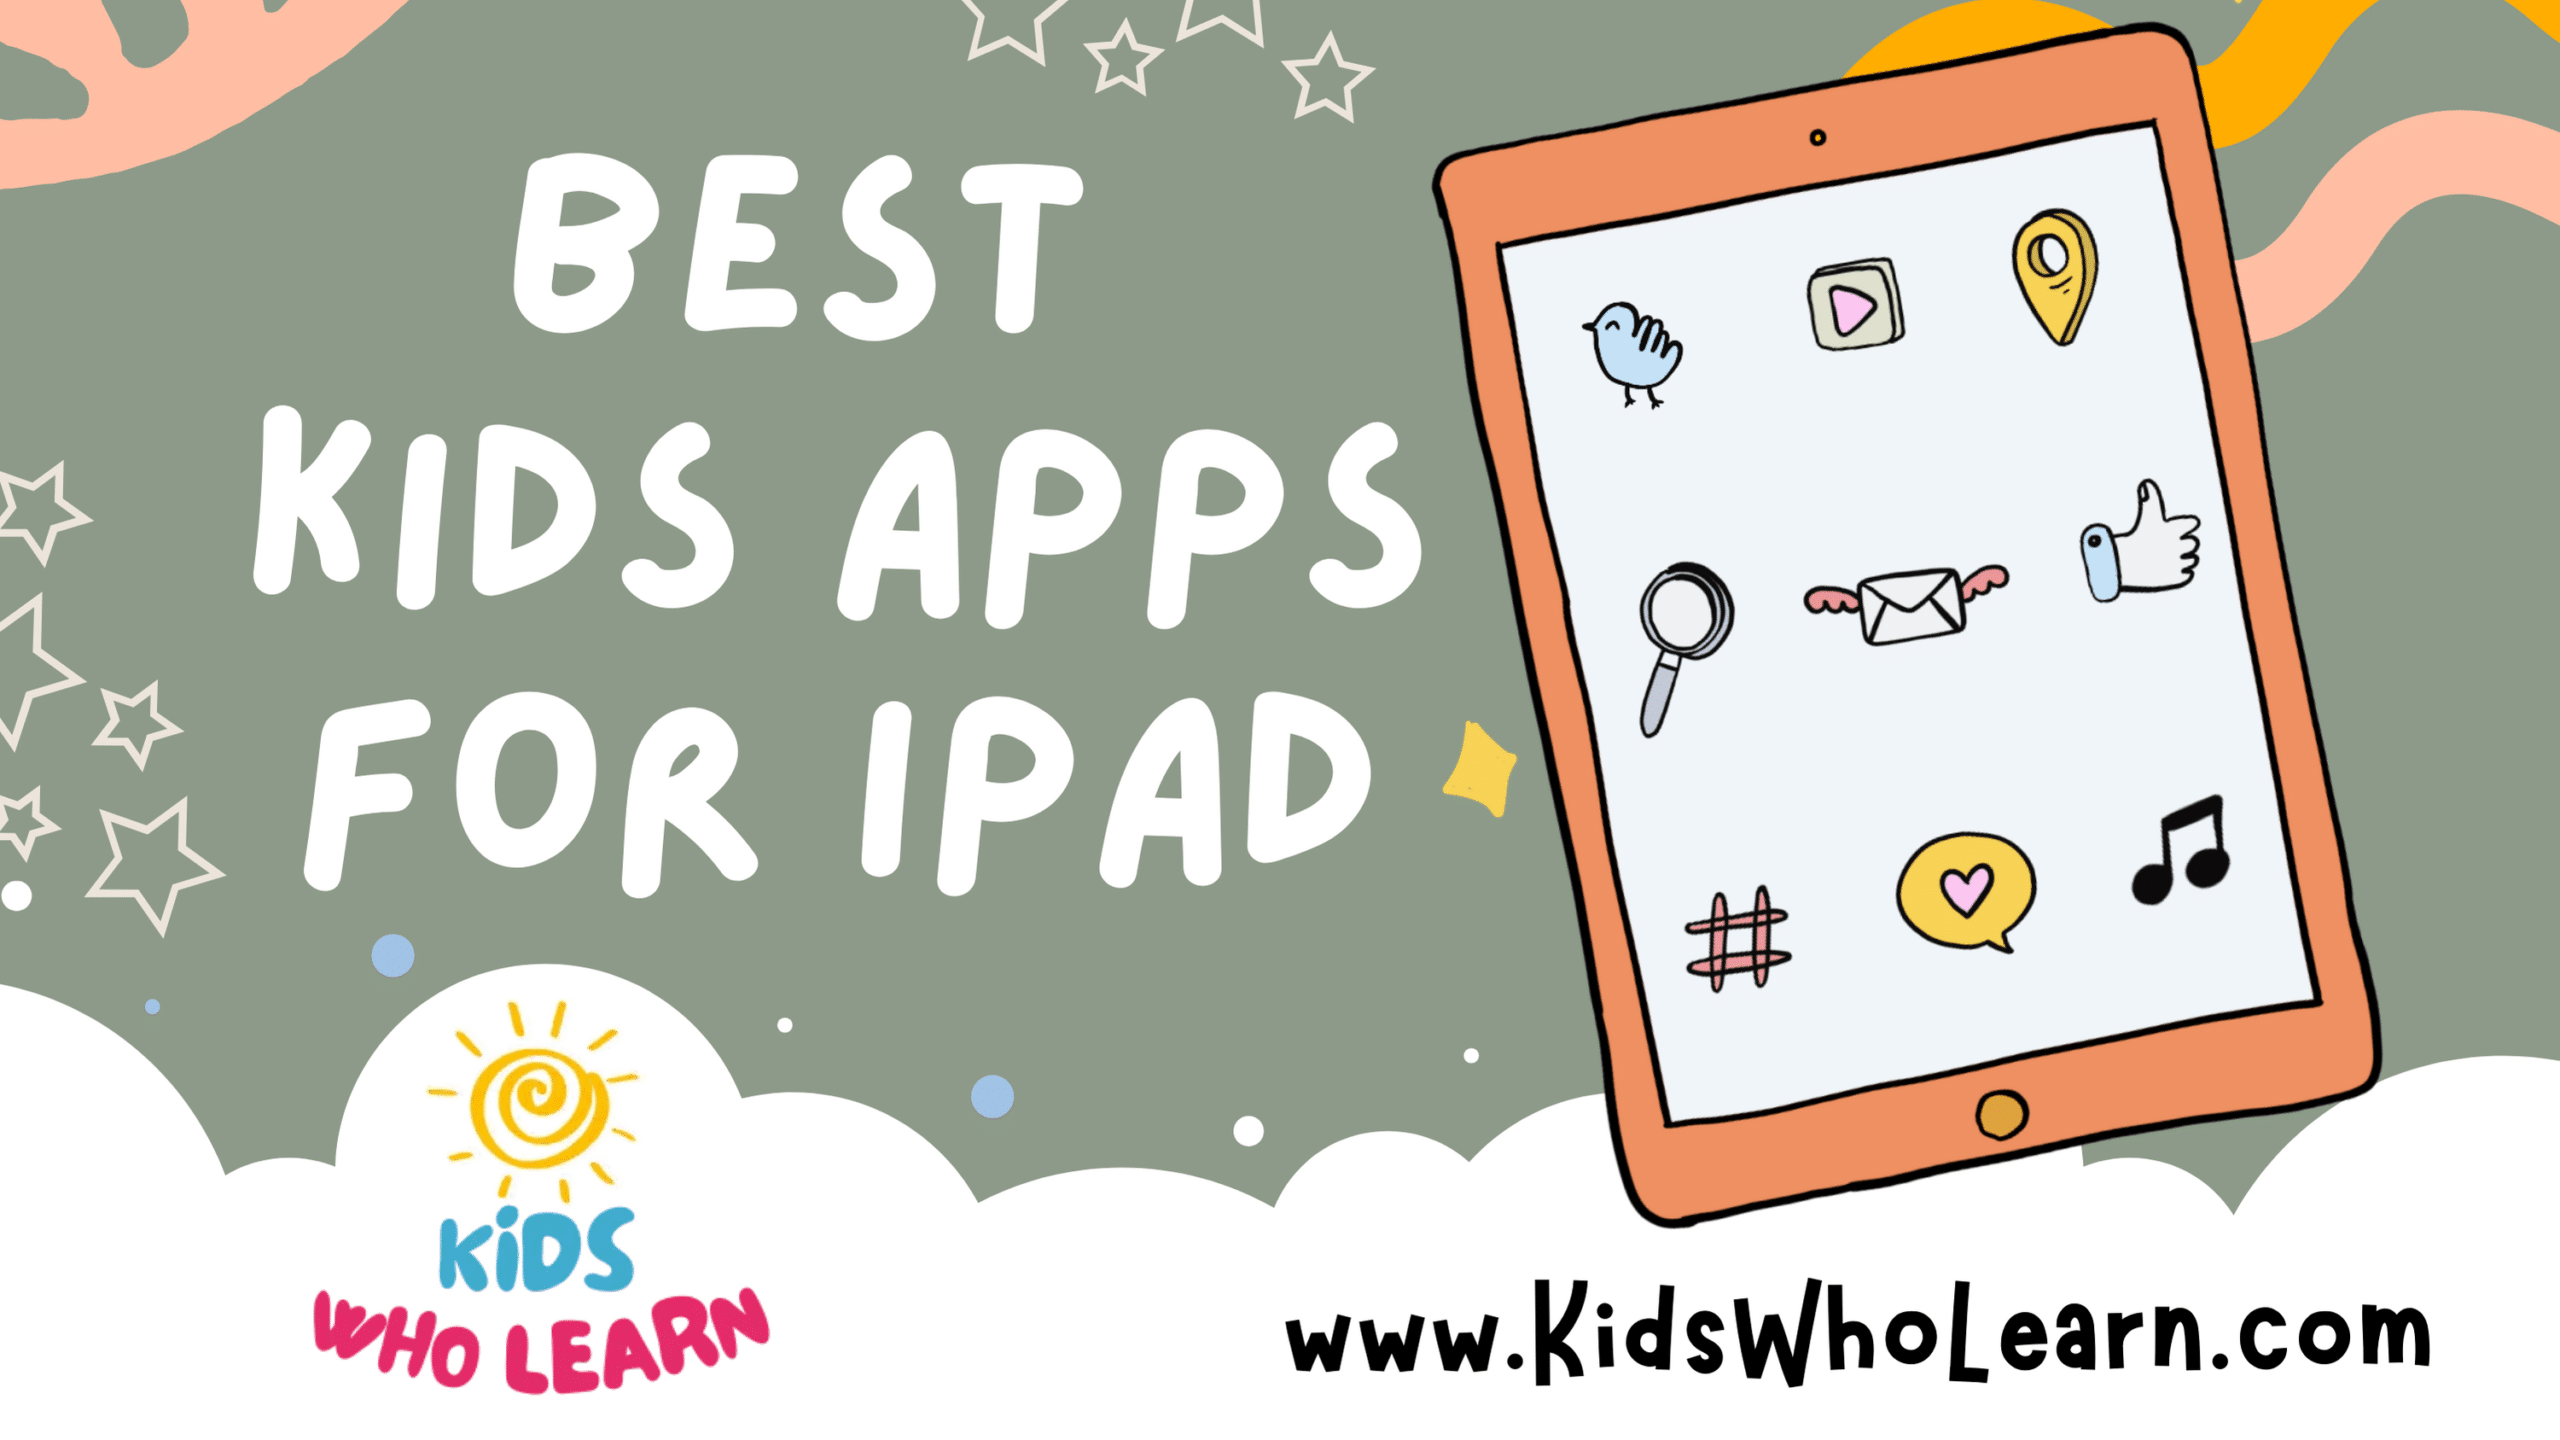 The Best Kids Apps for iPad: Top Picks for Learning